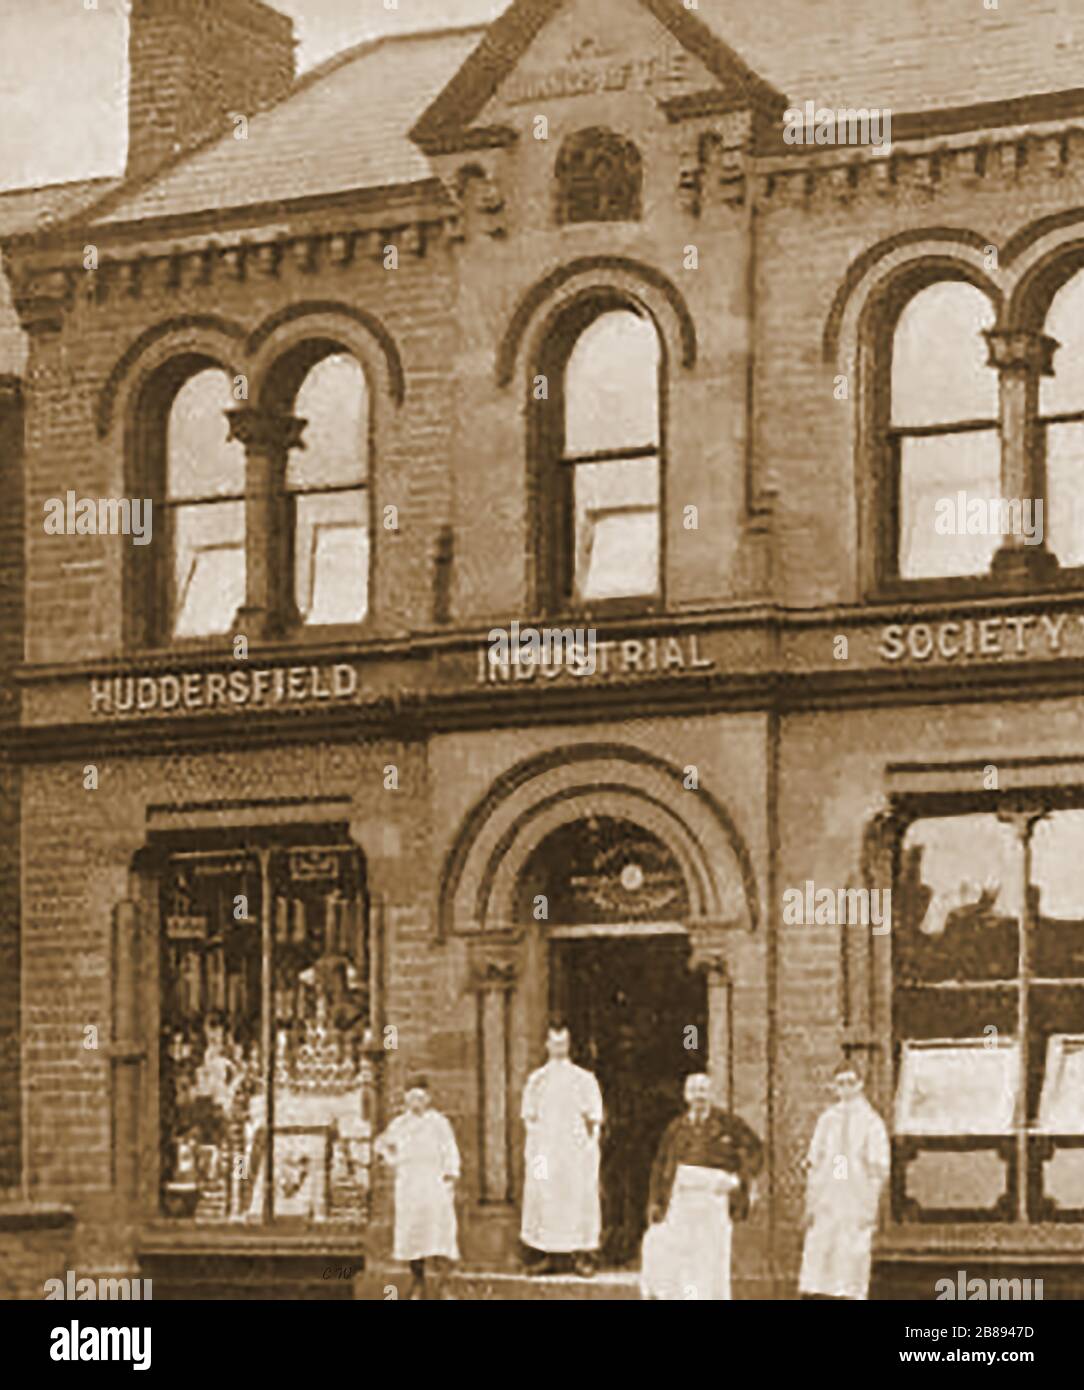 Huddersfield Industrial Society - An early photograph of  Marsh Grocery Stores Stock Photo